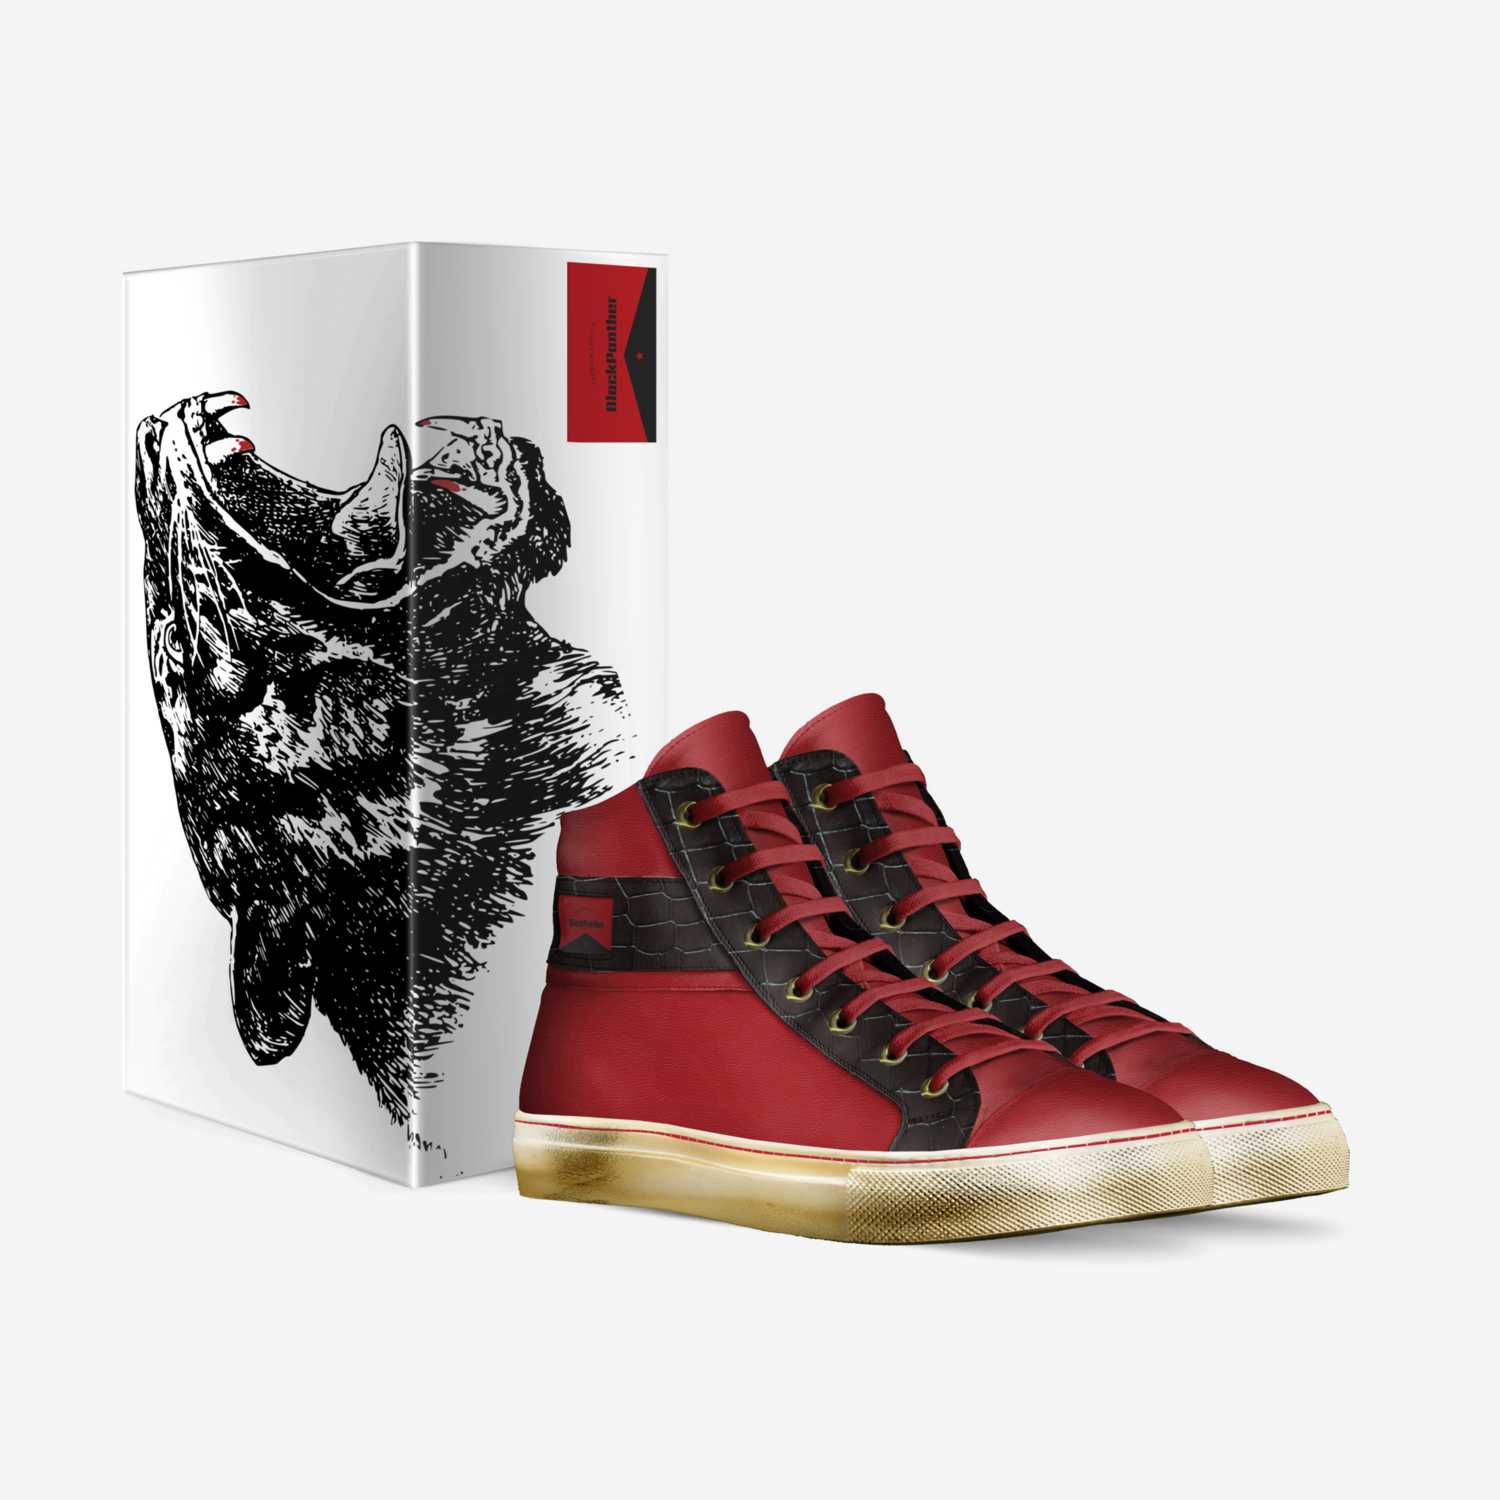 BlackPanther custom made in Italy shoes by Strike Your Sporting Side | Box view